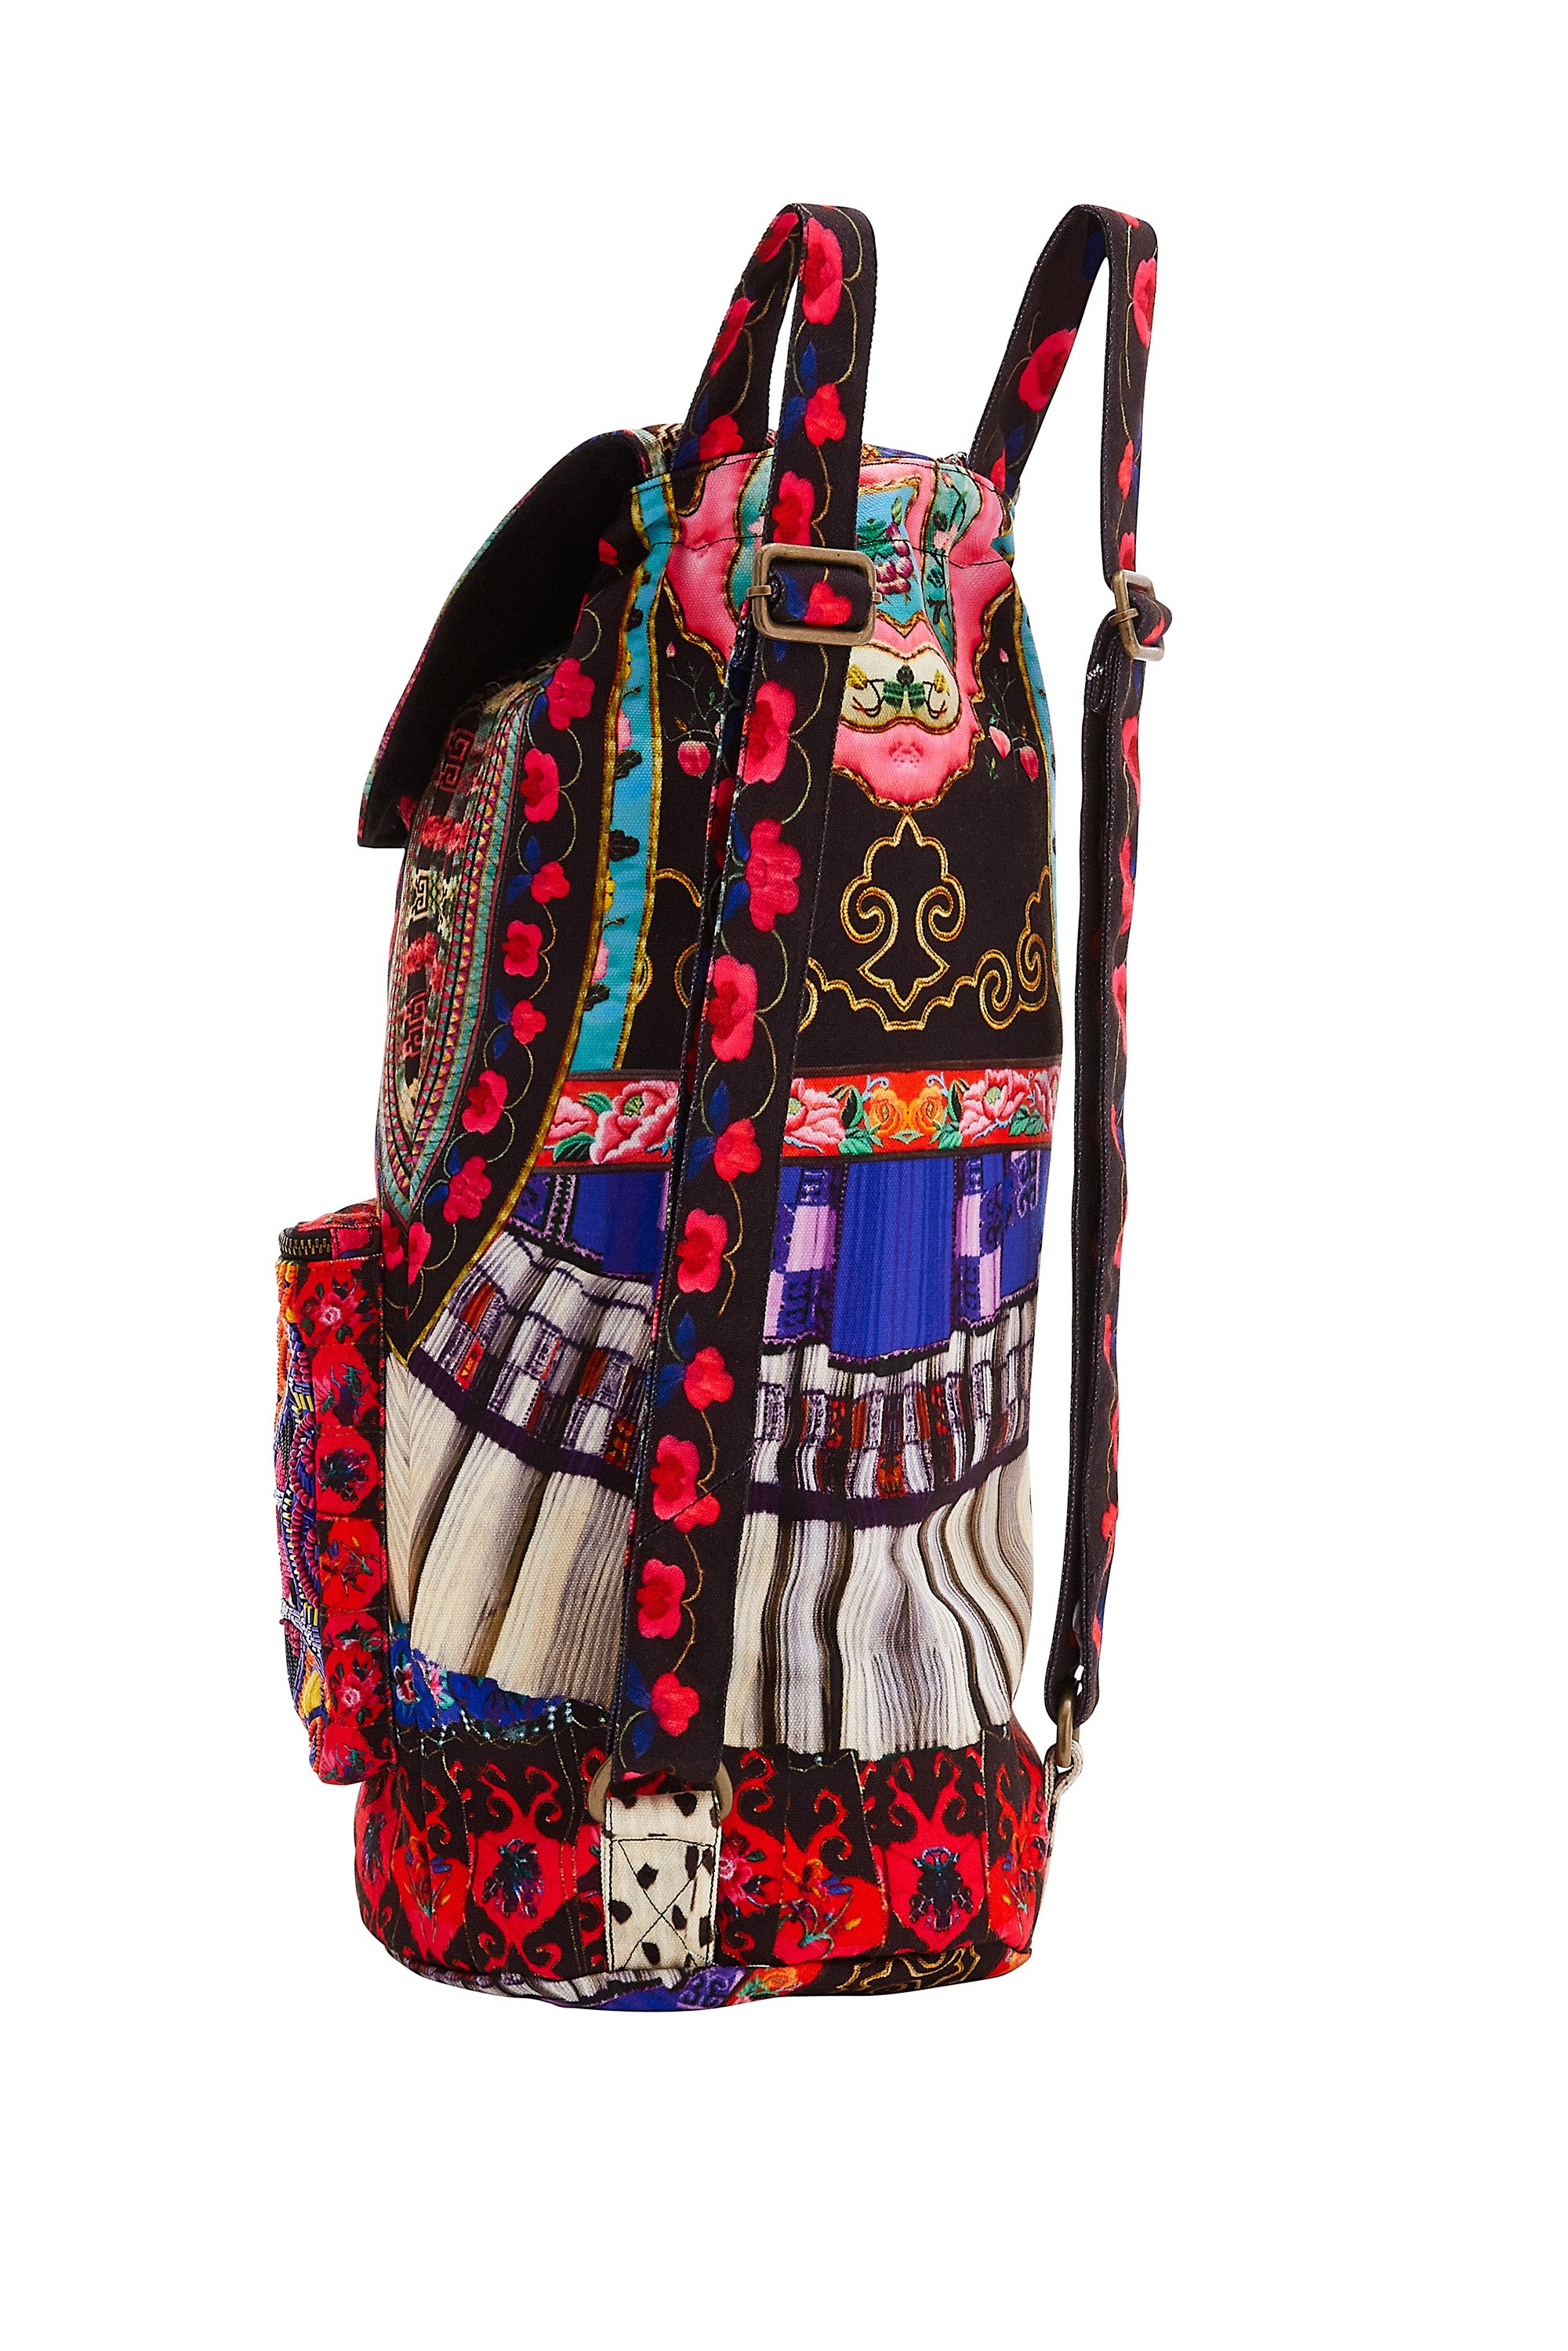 ABOUT A GIRL EMBROIDERED BACK PACK